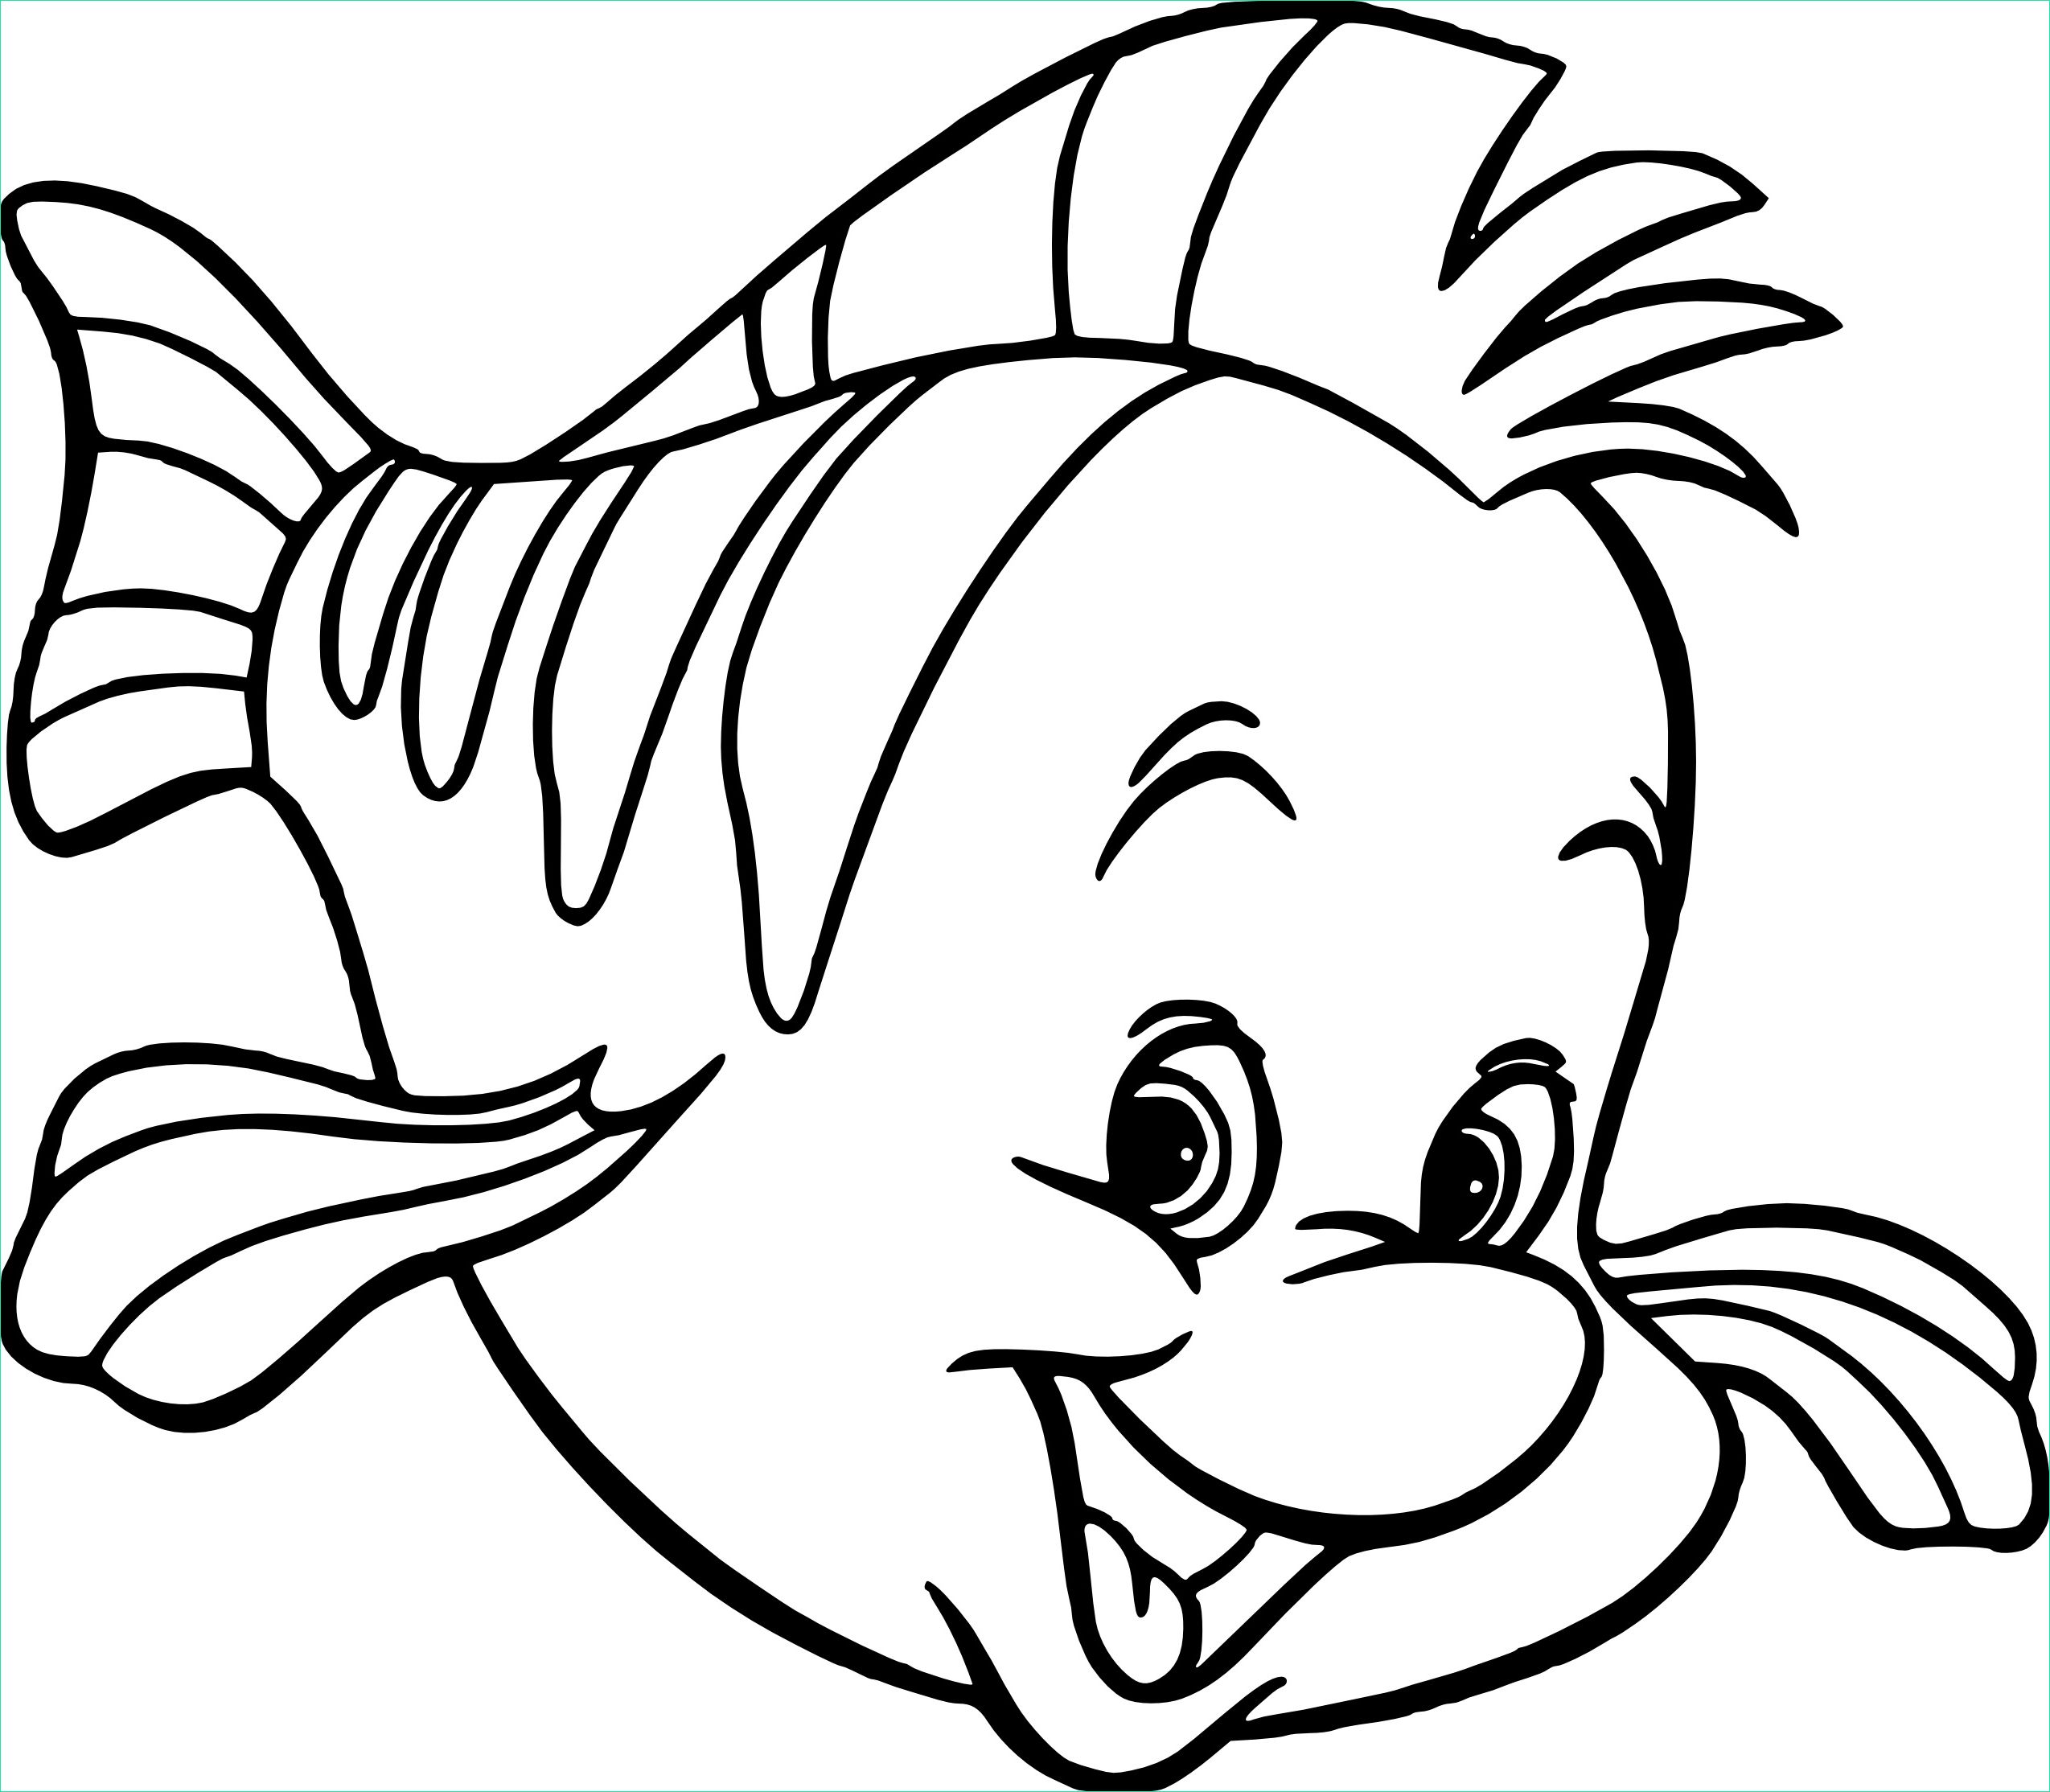 Poissons Coloriage Bestof Collection 15 Loisirs Coloriage Poisson Graph Coloriage